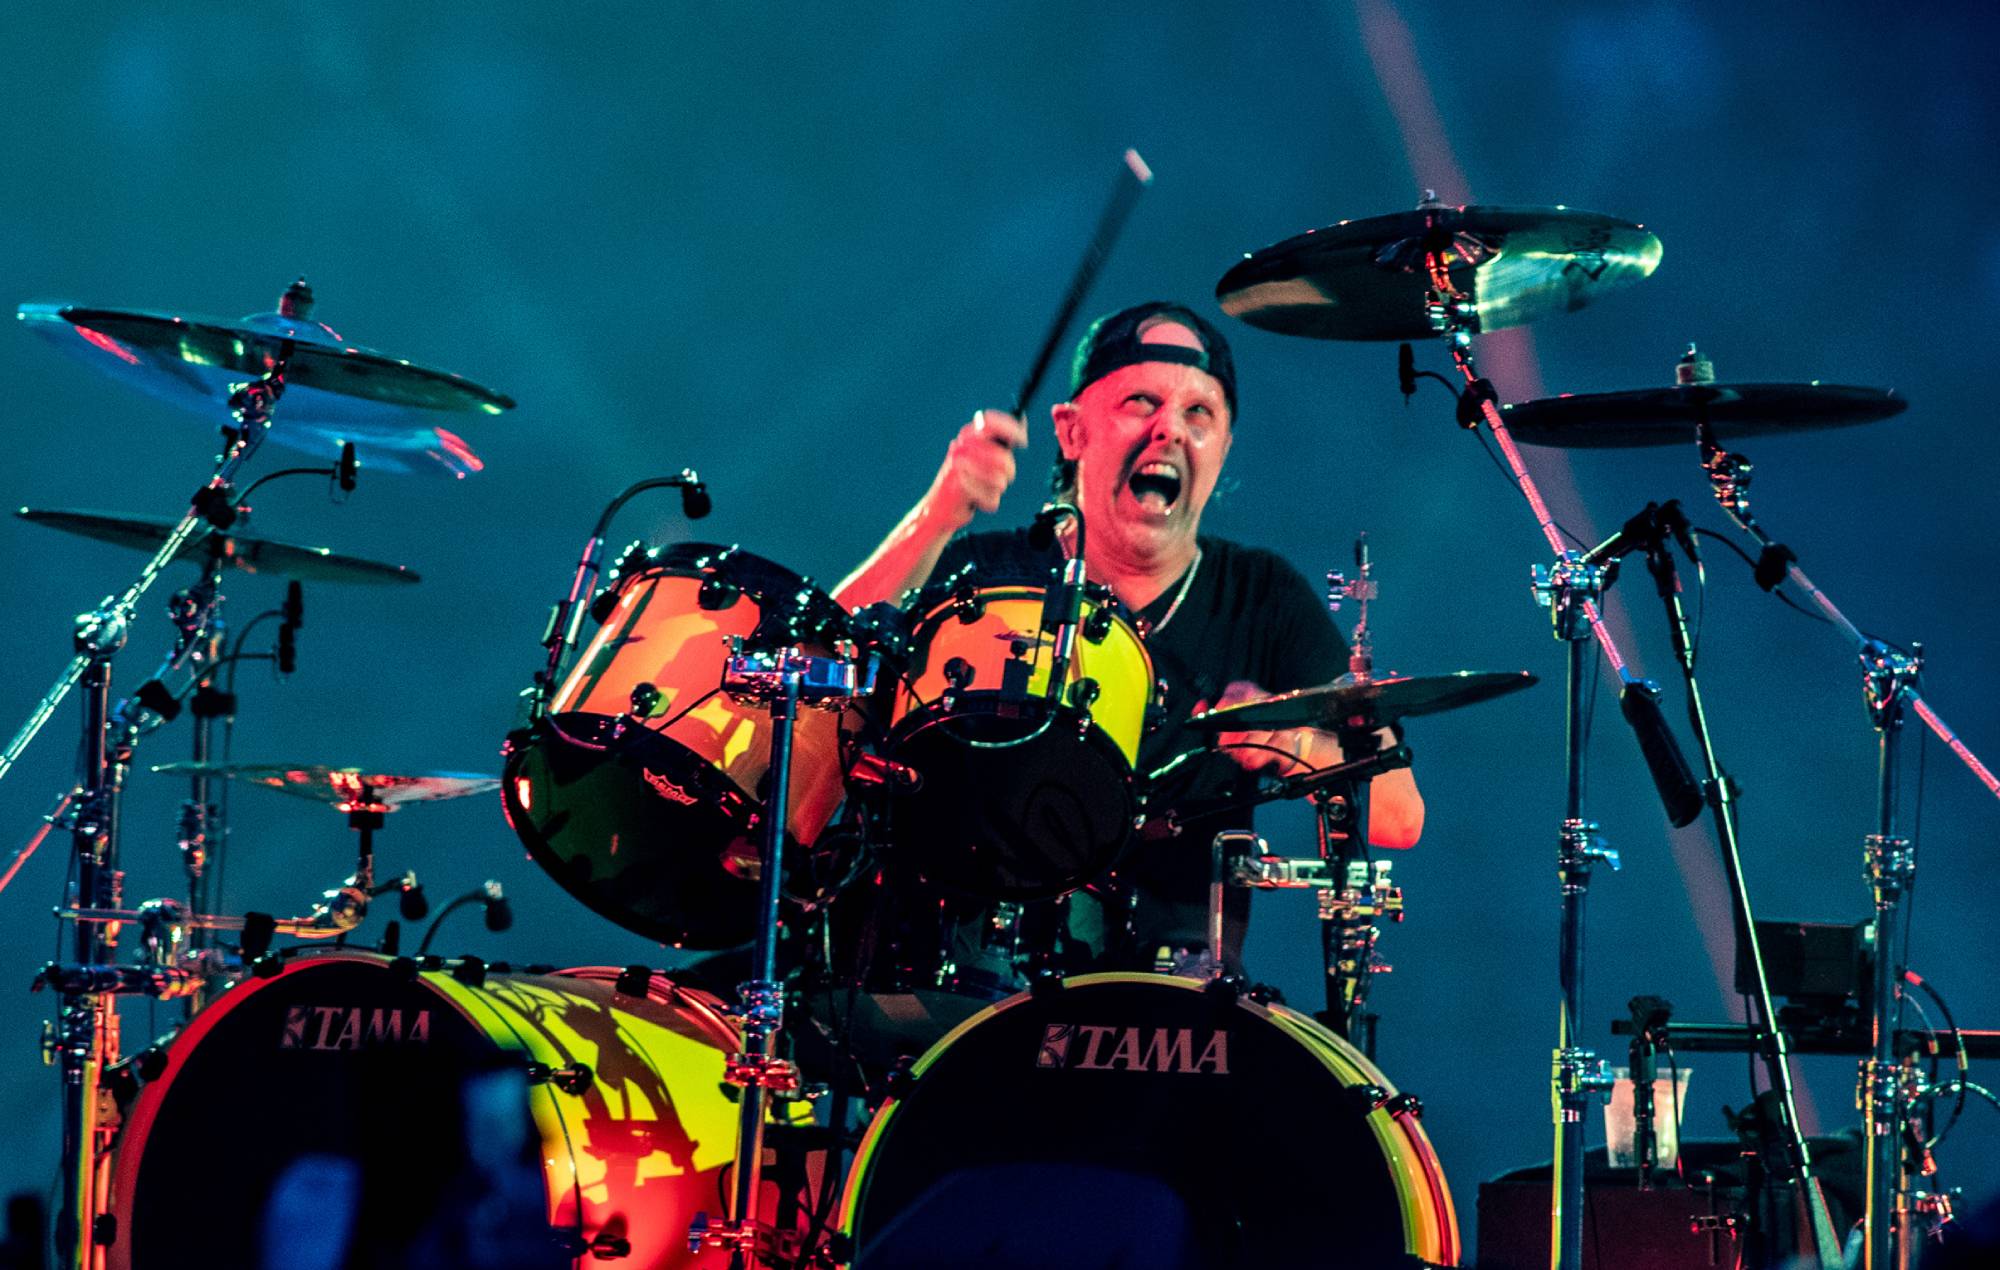 Lars Ulrich explains why he had to stop fans stealing cushions at their shows